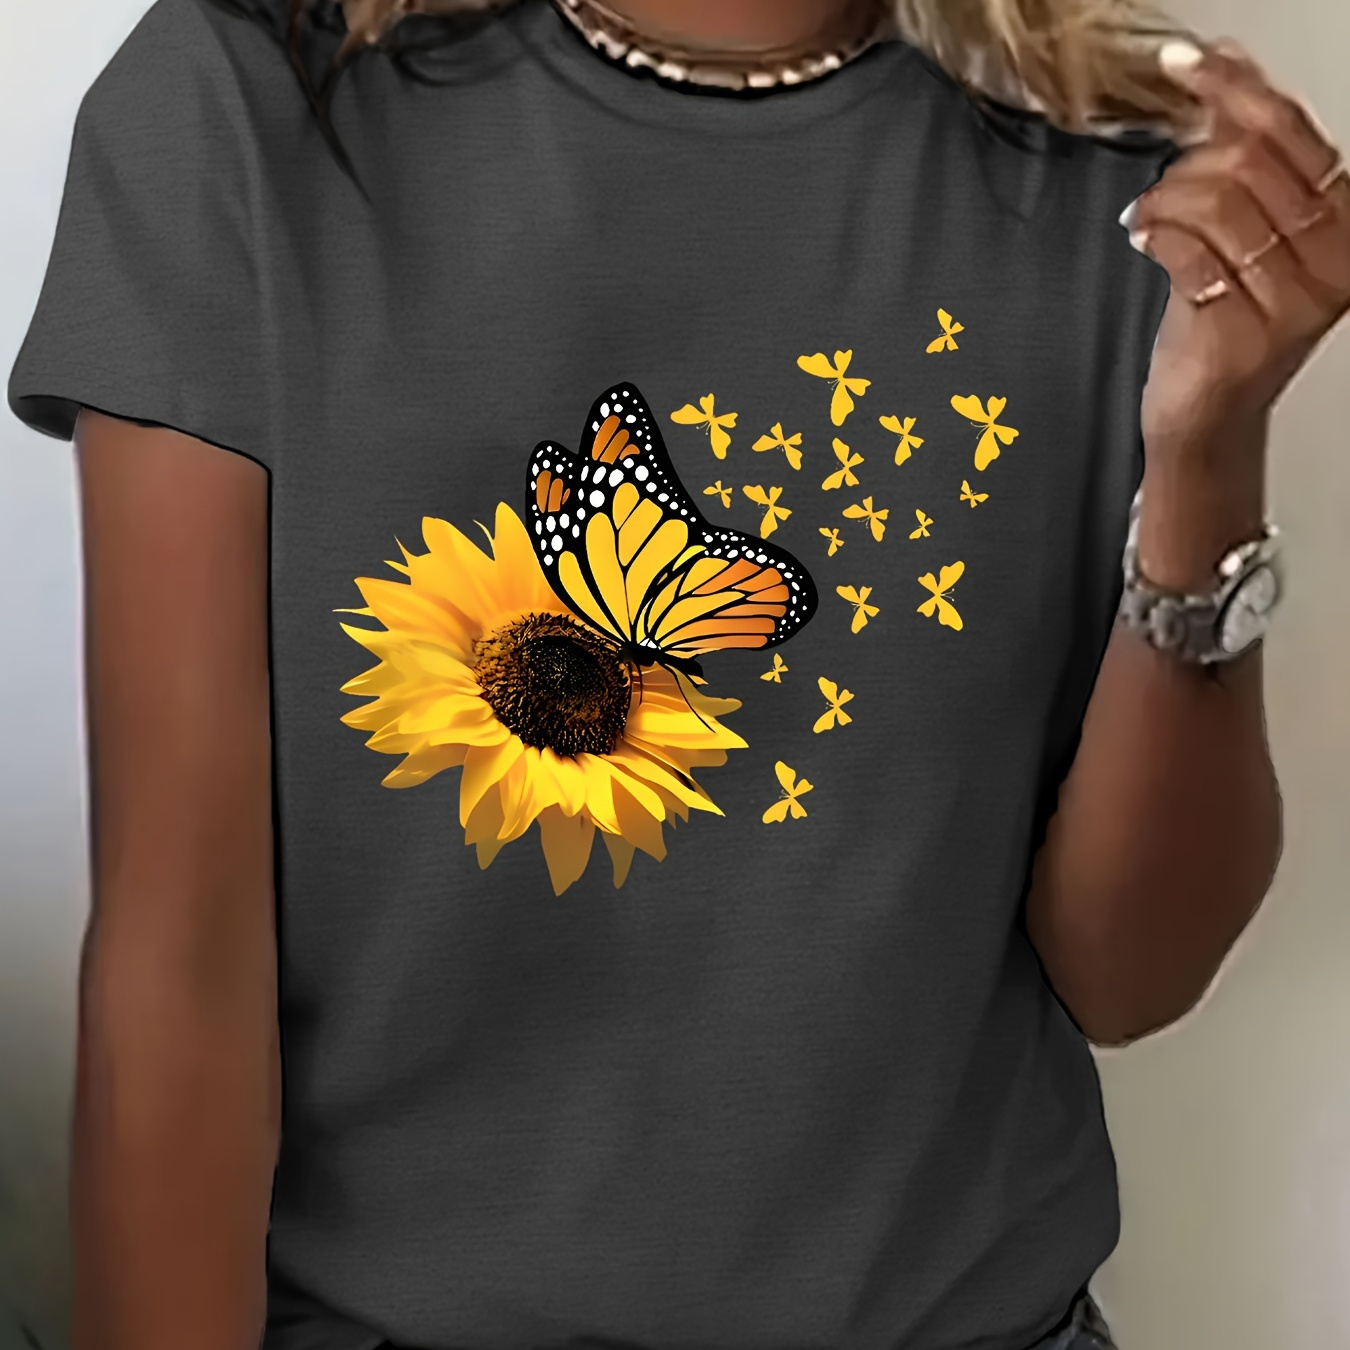 

Sunflower & Butterfly Print Crew Neck T-shirt, Short Sleeve Casual Top For Spring & Summer, Women's Clothing